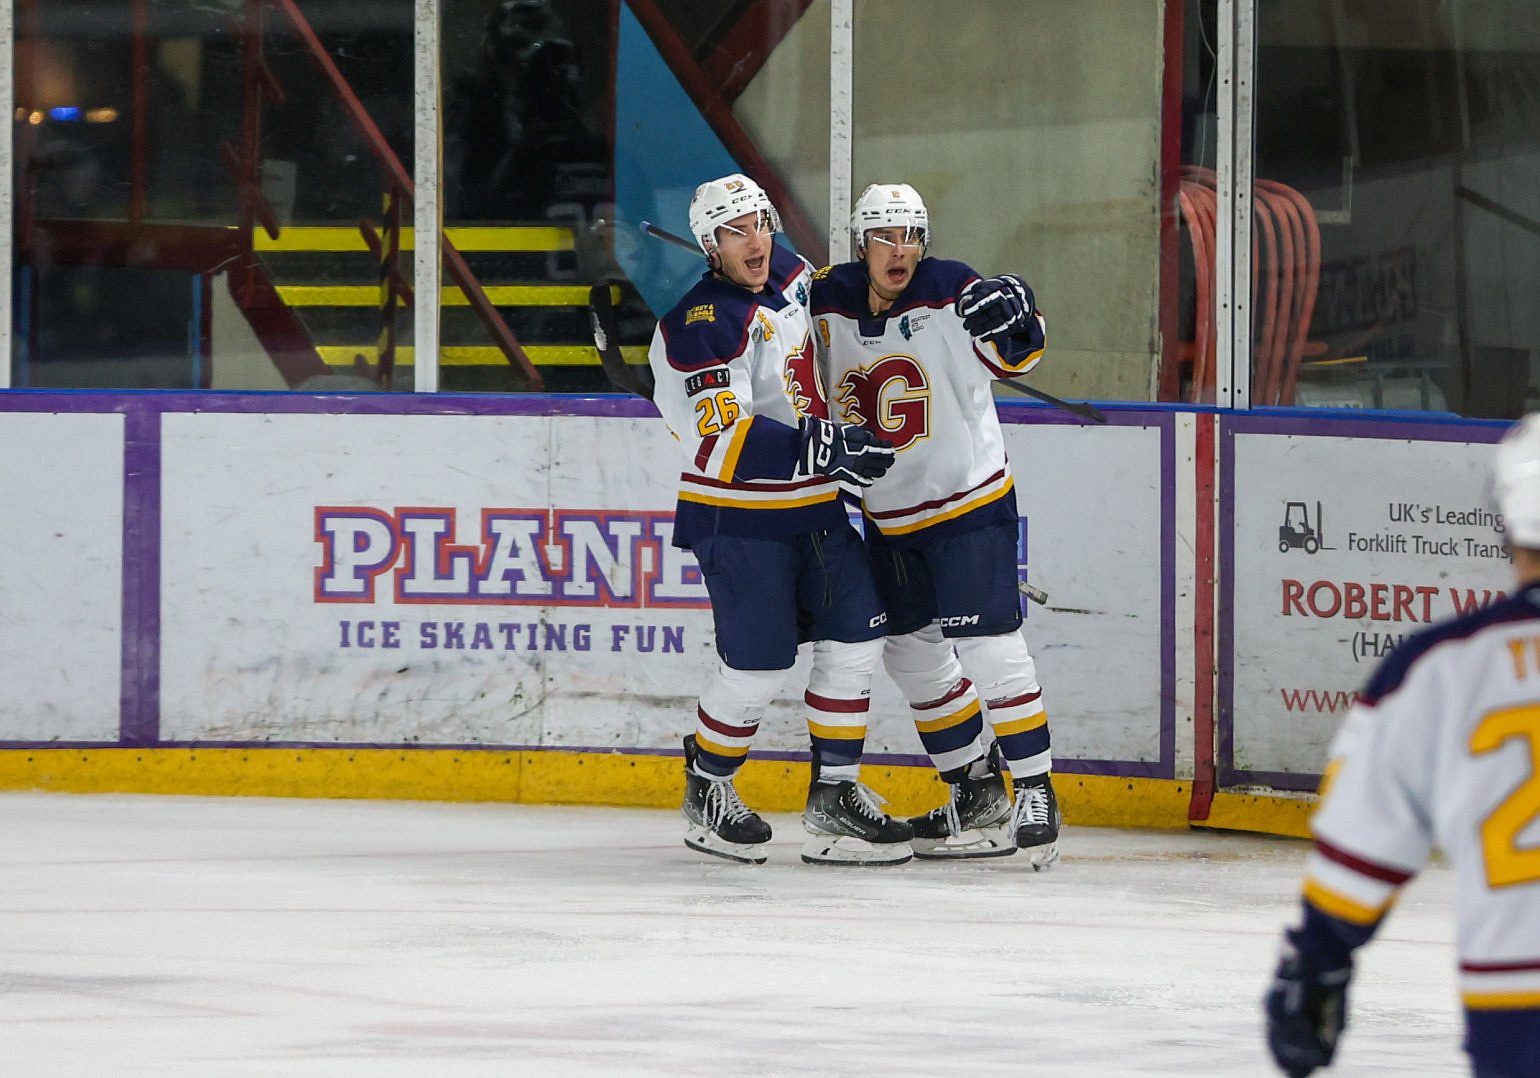 The Guildford Flames scored four first period goals to down the Manchester Storm (Image: Mark Ferris)